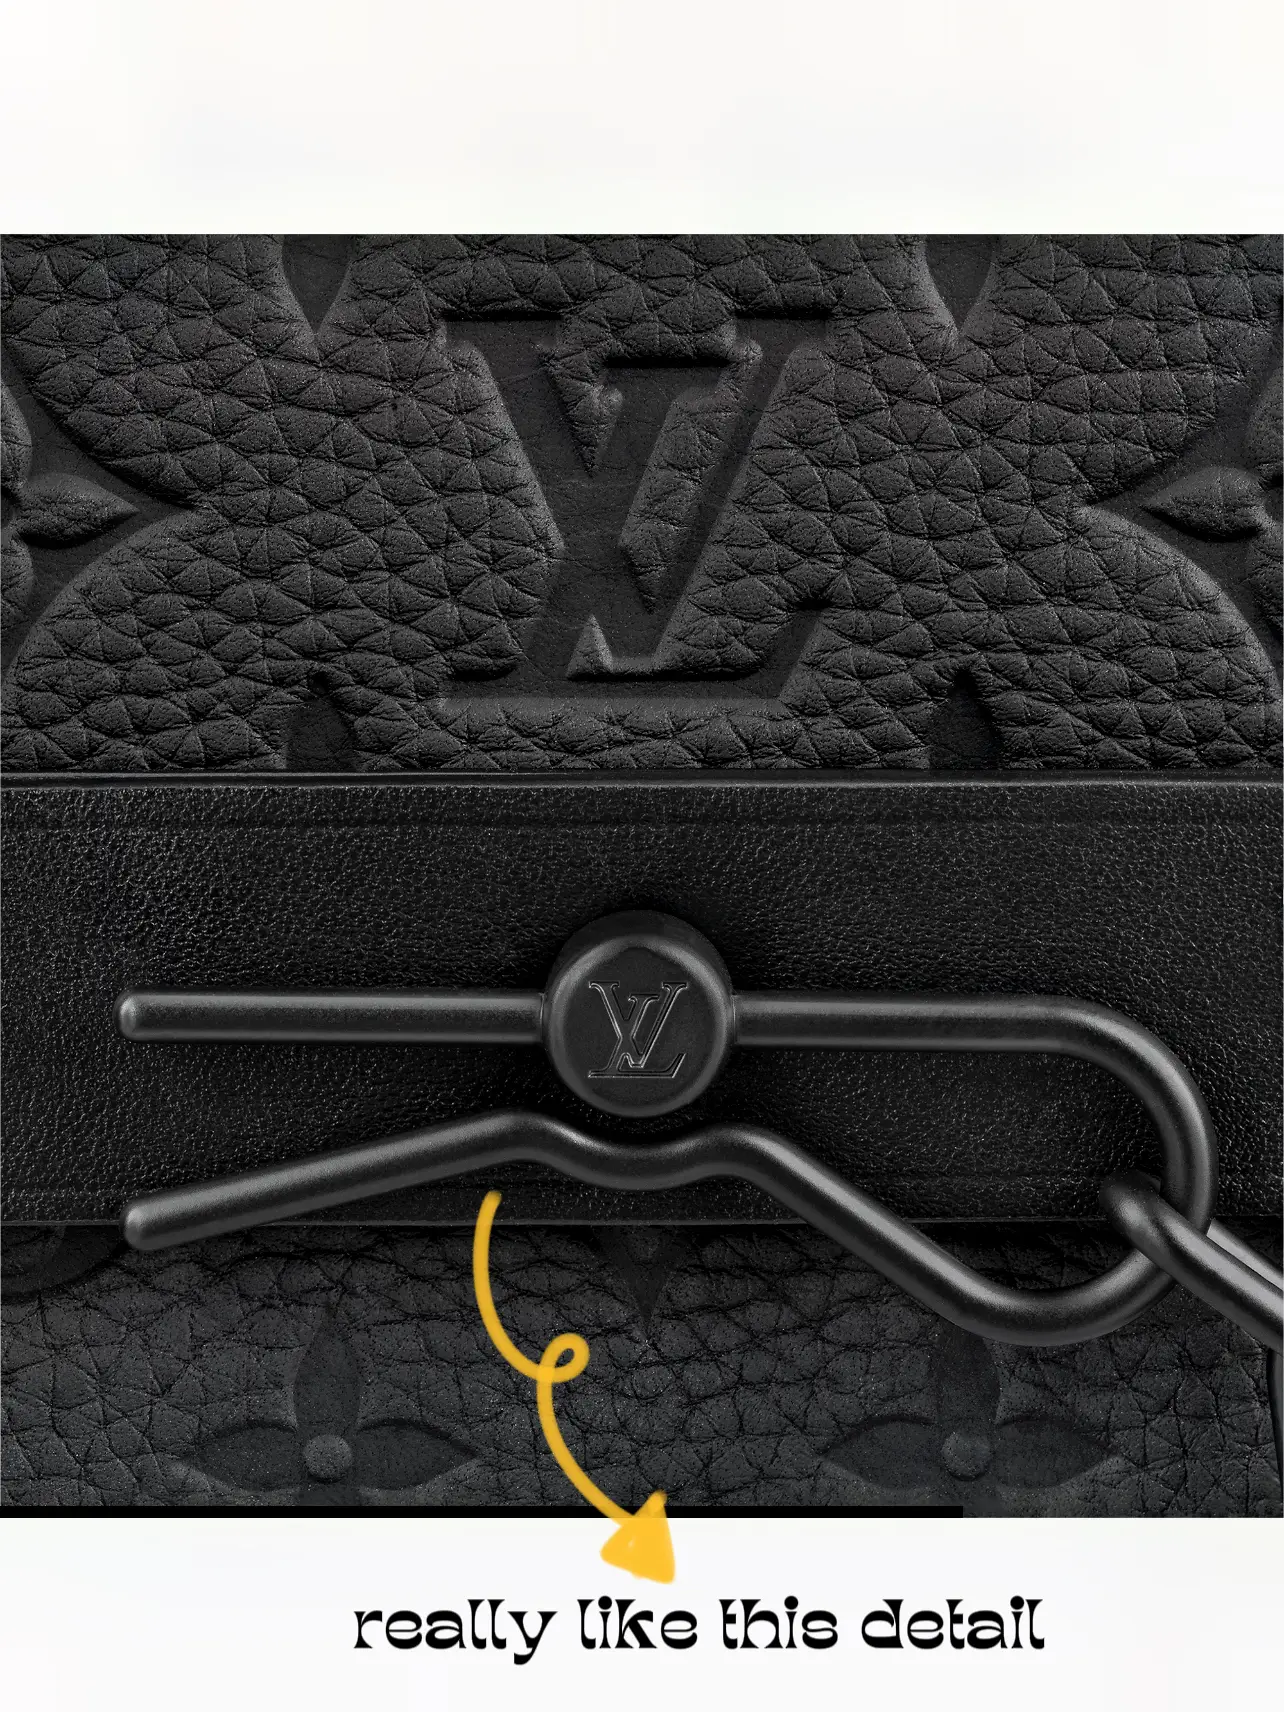 Louis Vuitton CHEAPER in Europe?? GUIDE to LUXURY Shopping in